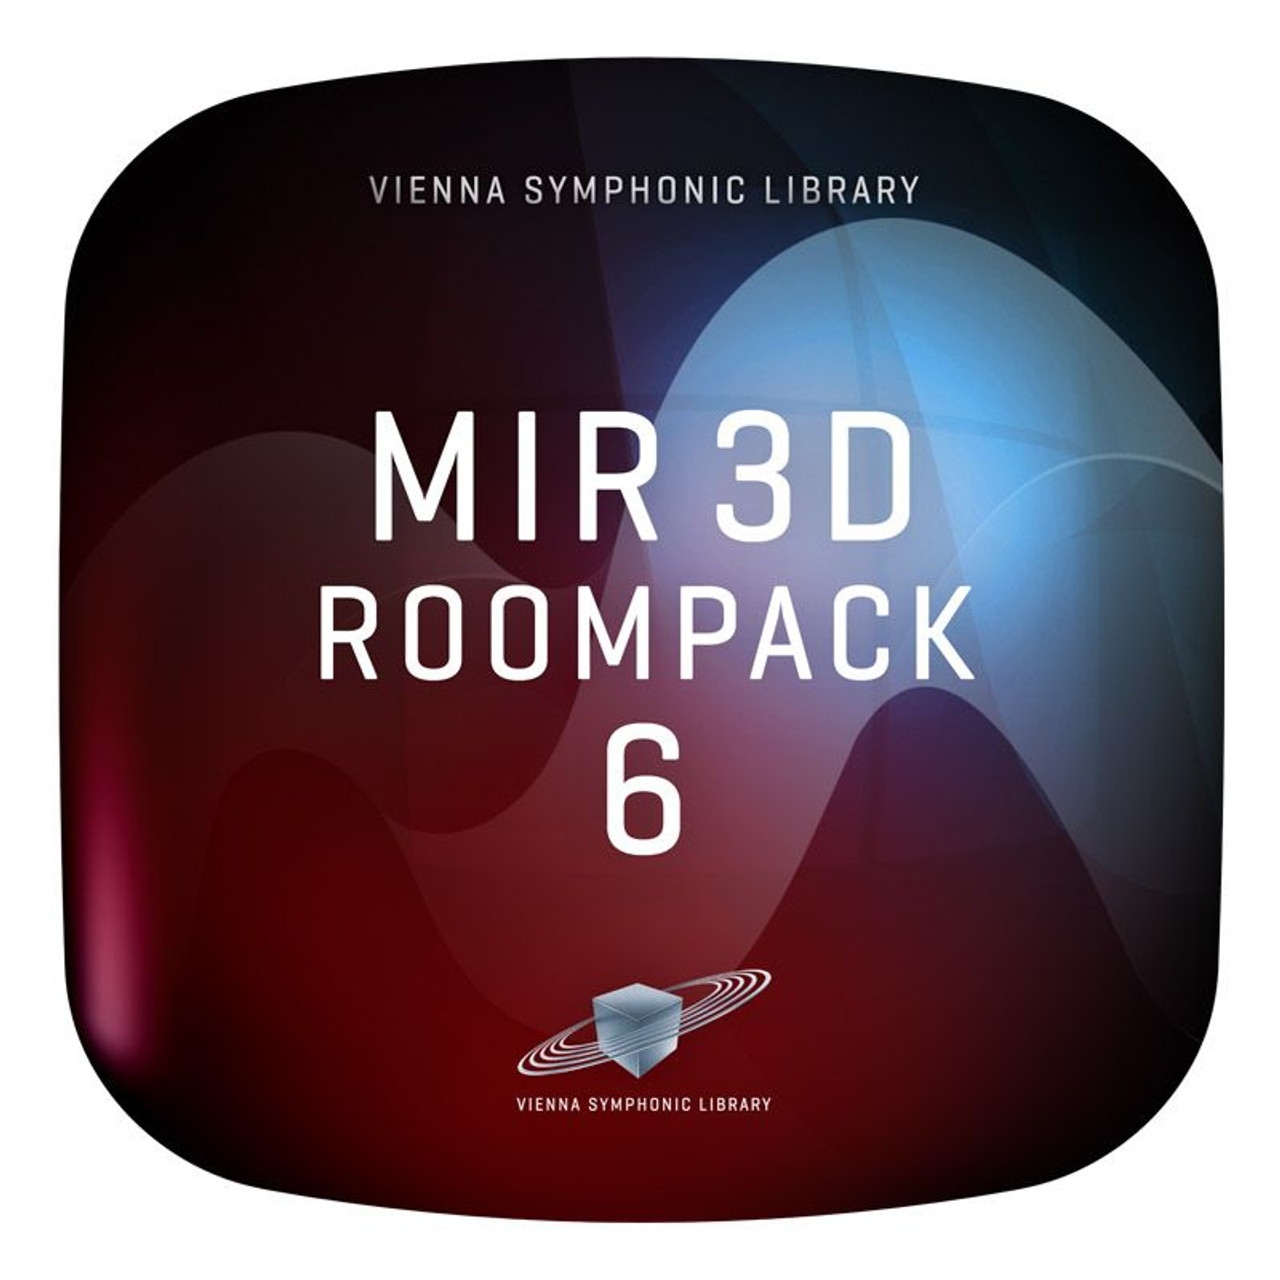 MIR 3D RoomPack 6 Synchron Stage Vienna - Upgrade from MIR RoomPack 6